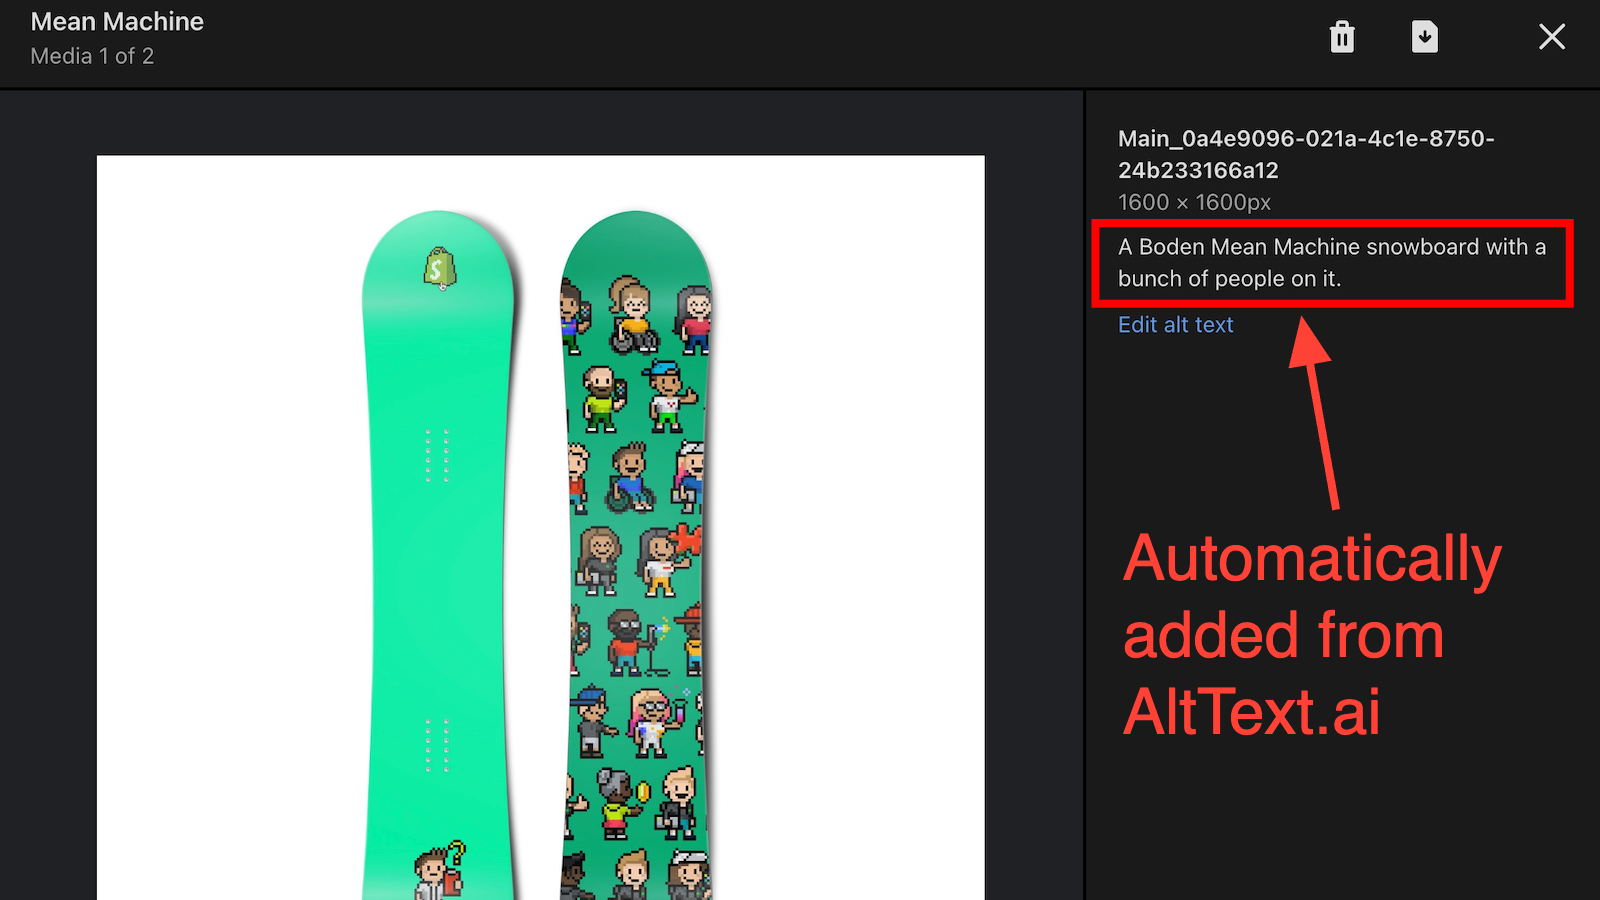 AltText.ai automatically added alt text to a product image.